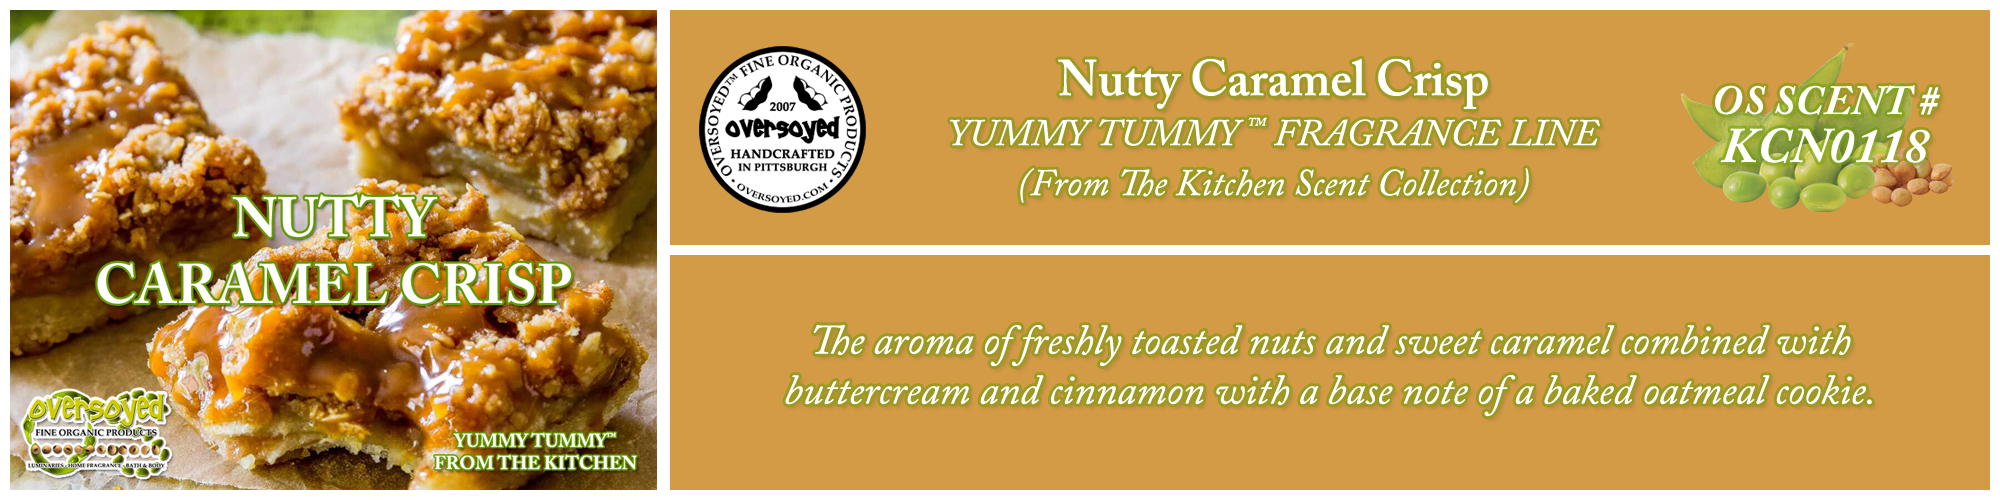 Nutty Caramel Crisp Handcrafted Products Collection